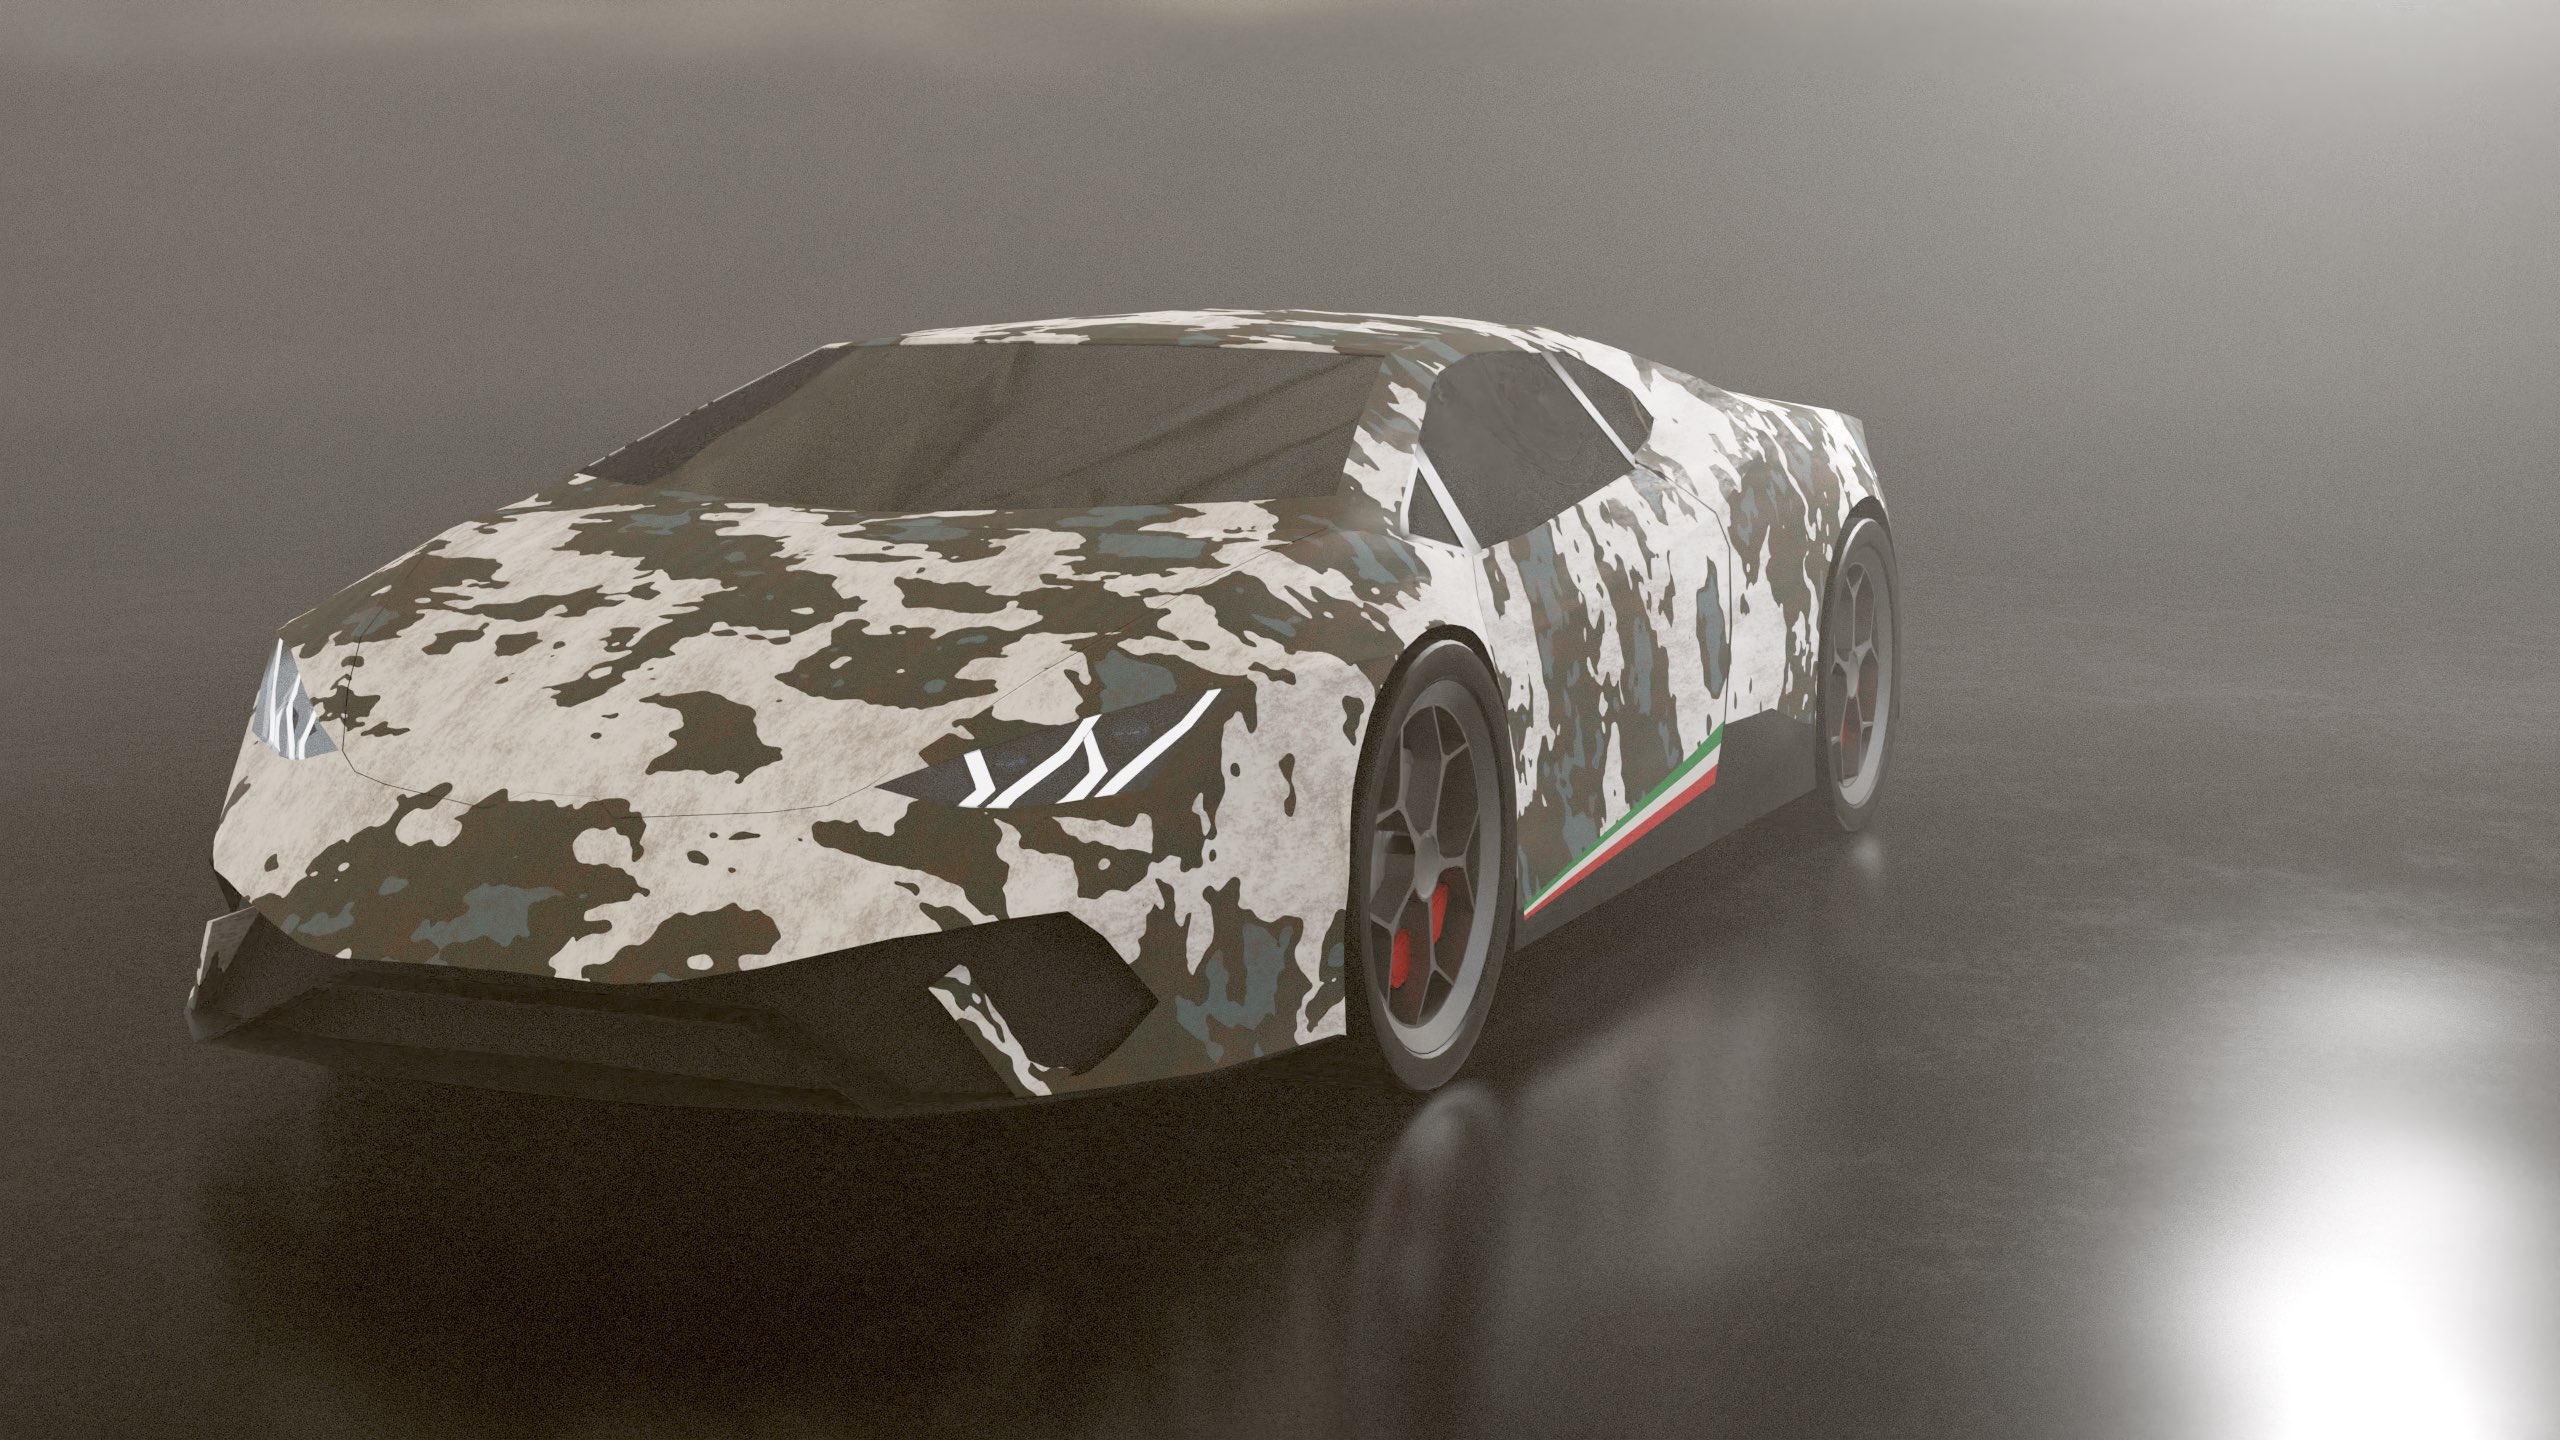 A car with dirty winter camo paint